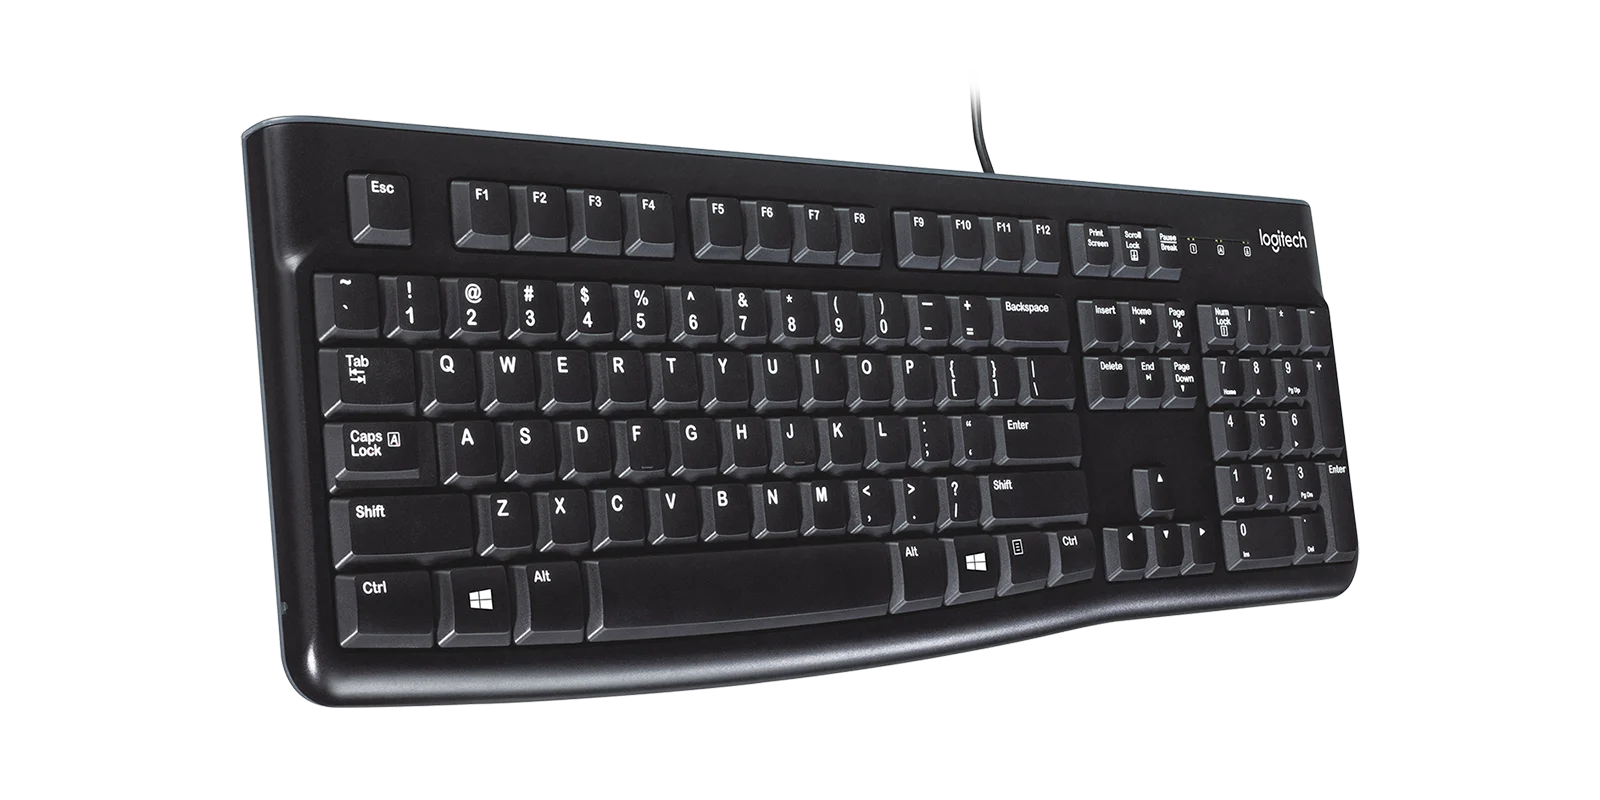 Logitech K120 Wired Keyboard for Windows, Plug and Play, Full-Size, Spill-Resistant, Curved Space Bar, Compatible with PC, Laptop - Black